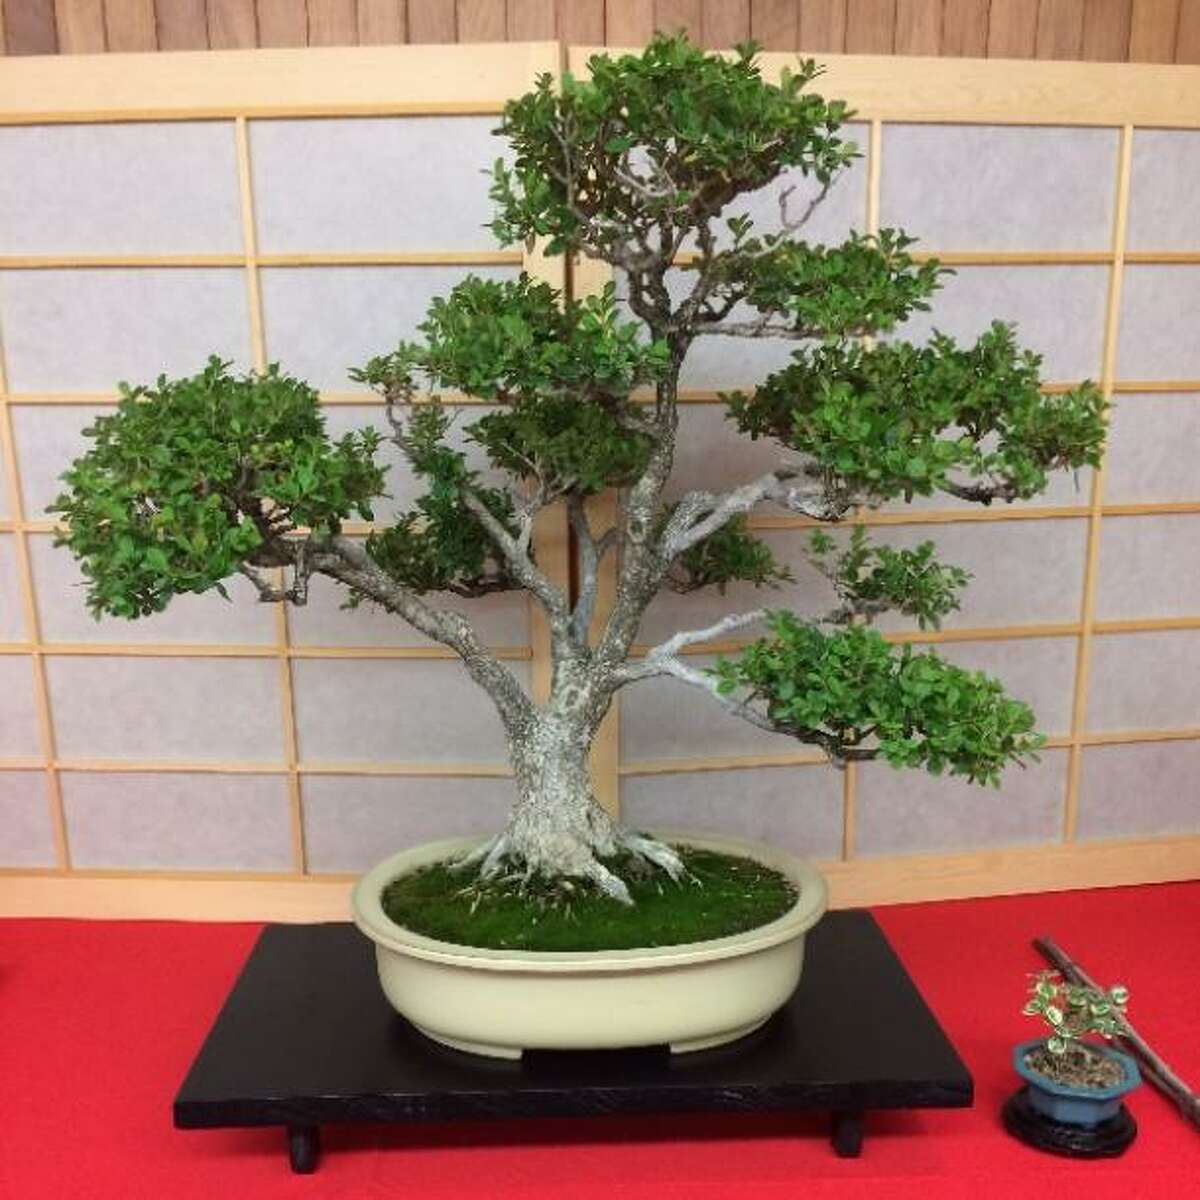 The San Antonio Bonsai Society has cultivated the ancient Japanese art of miniature trees for nearly 45 years, showcasing all sorts of tiny trees in shallow pots, such as this boxwood bonsai.